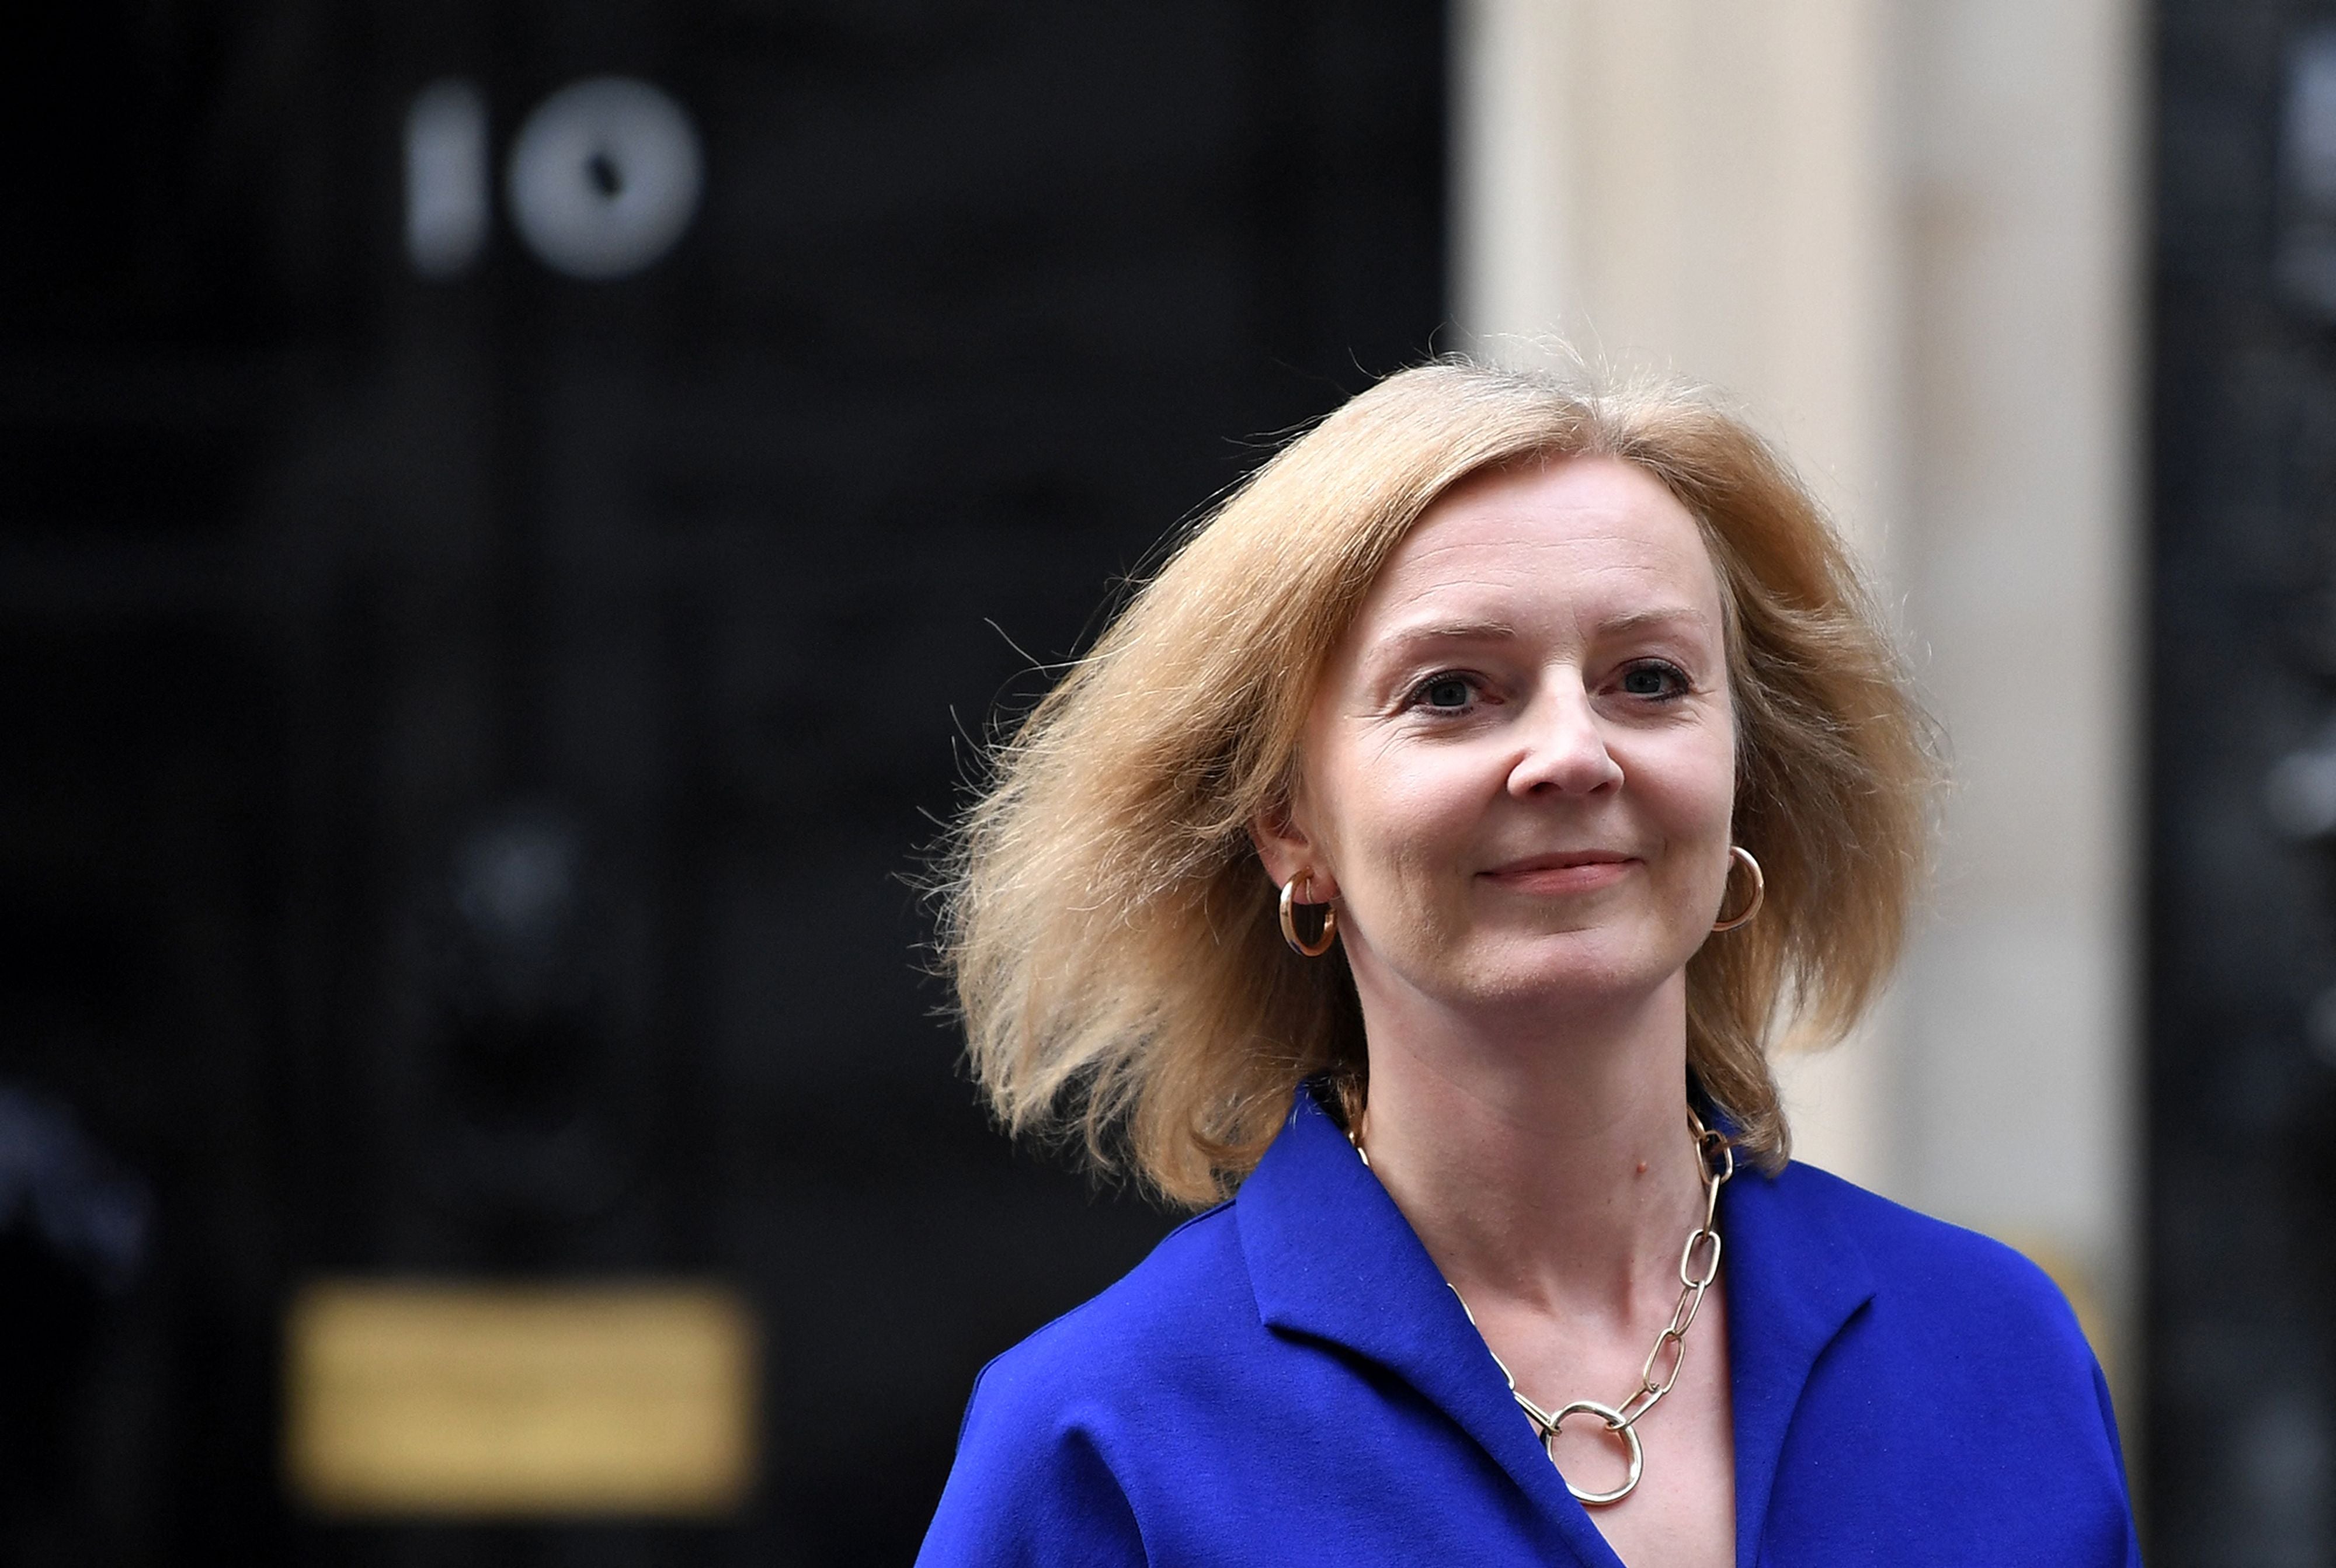 Liz Truss backers have called for right-wingers to rally behind the foreign secretary